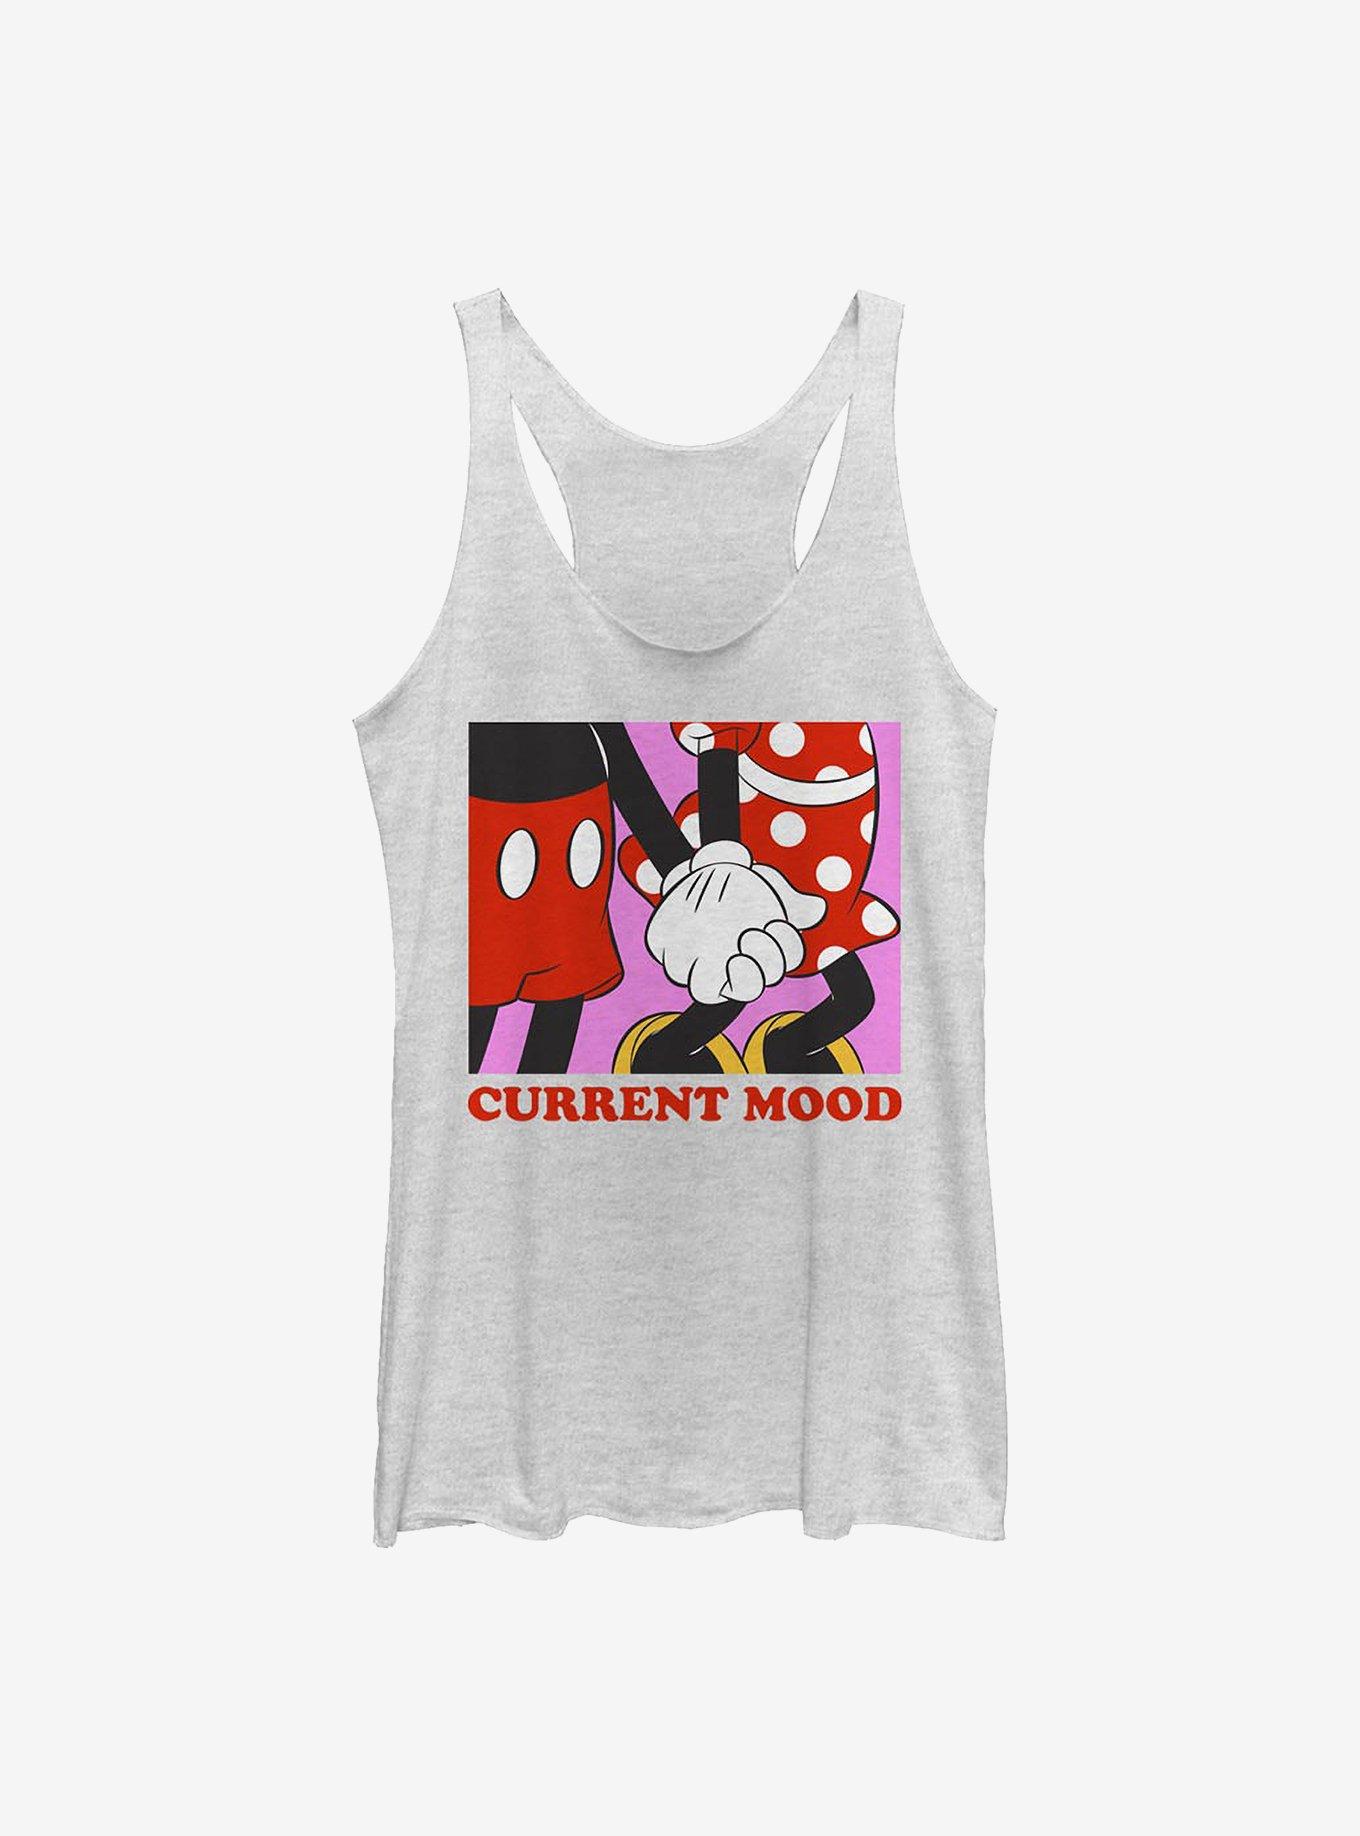 Hot Topic Disney Mickey Mouse & Minnie Current Mood Girls Tank Top